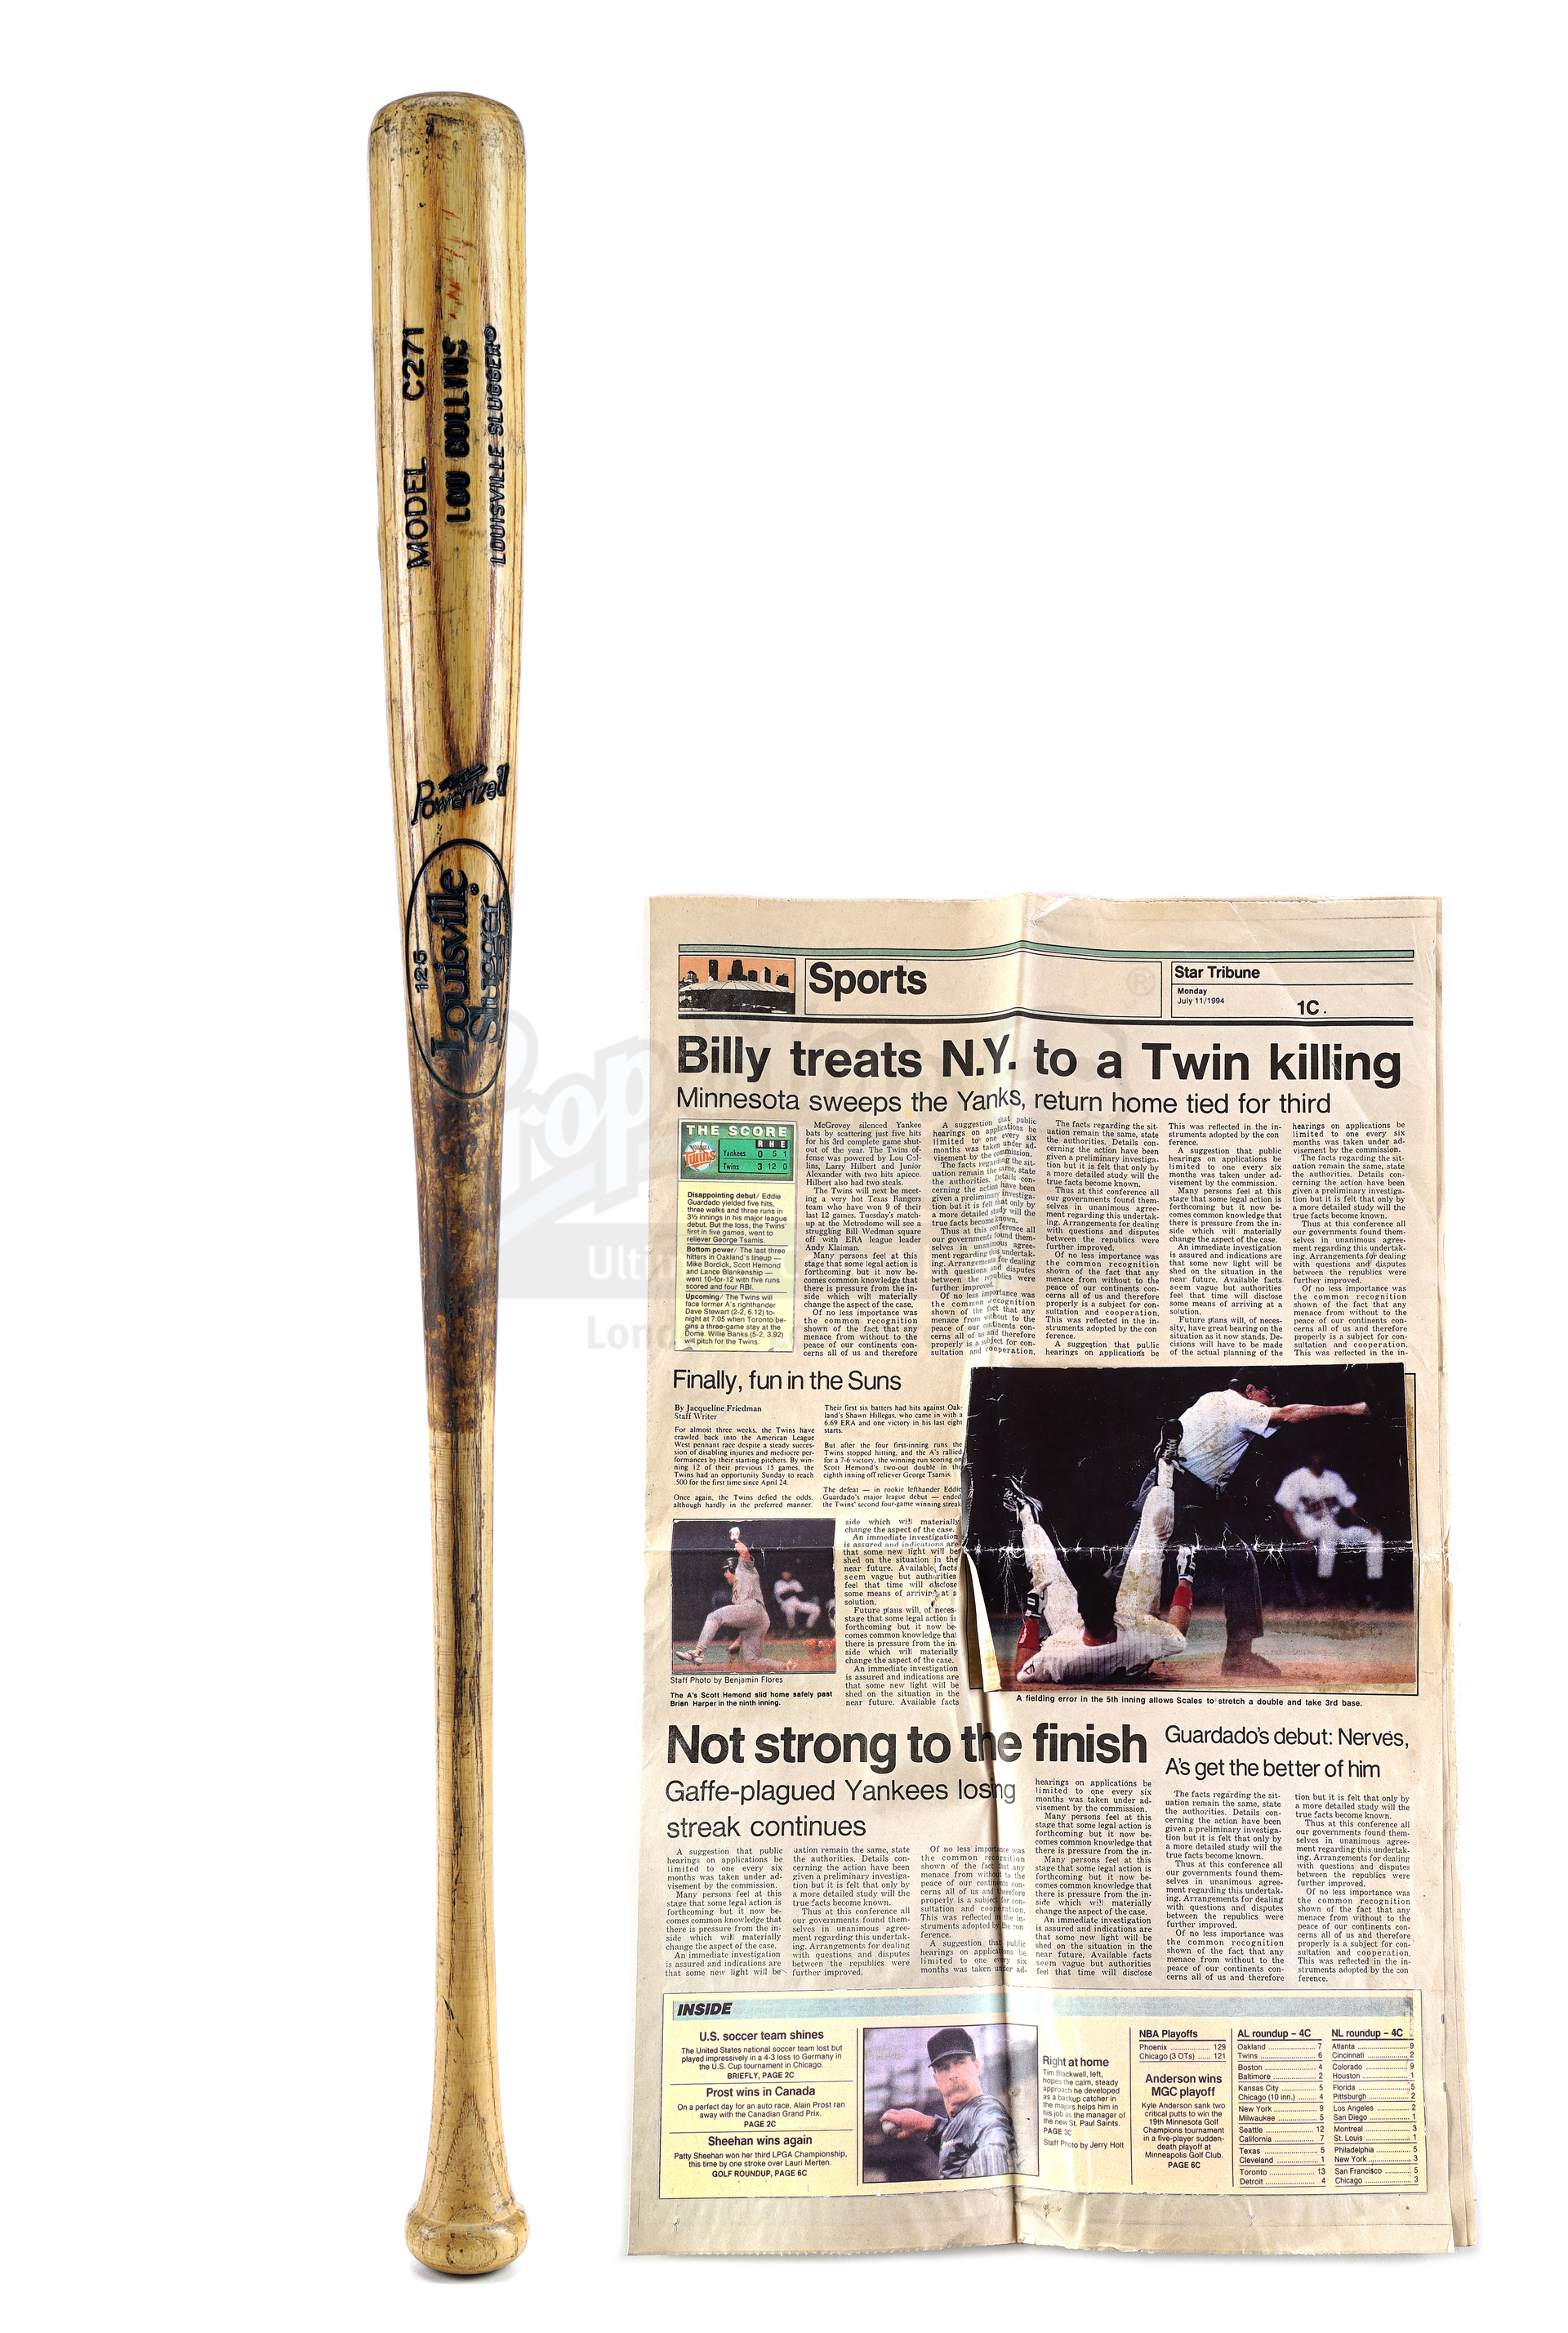 Lot # 829: LITTLE BIG LEAGUE - Lou Collins' (Timothy Busfeld) Louisville Slugger with Billy Heywood